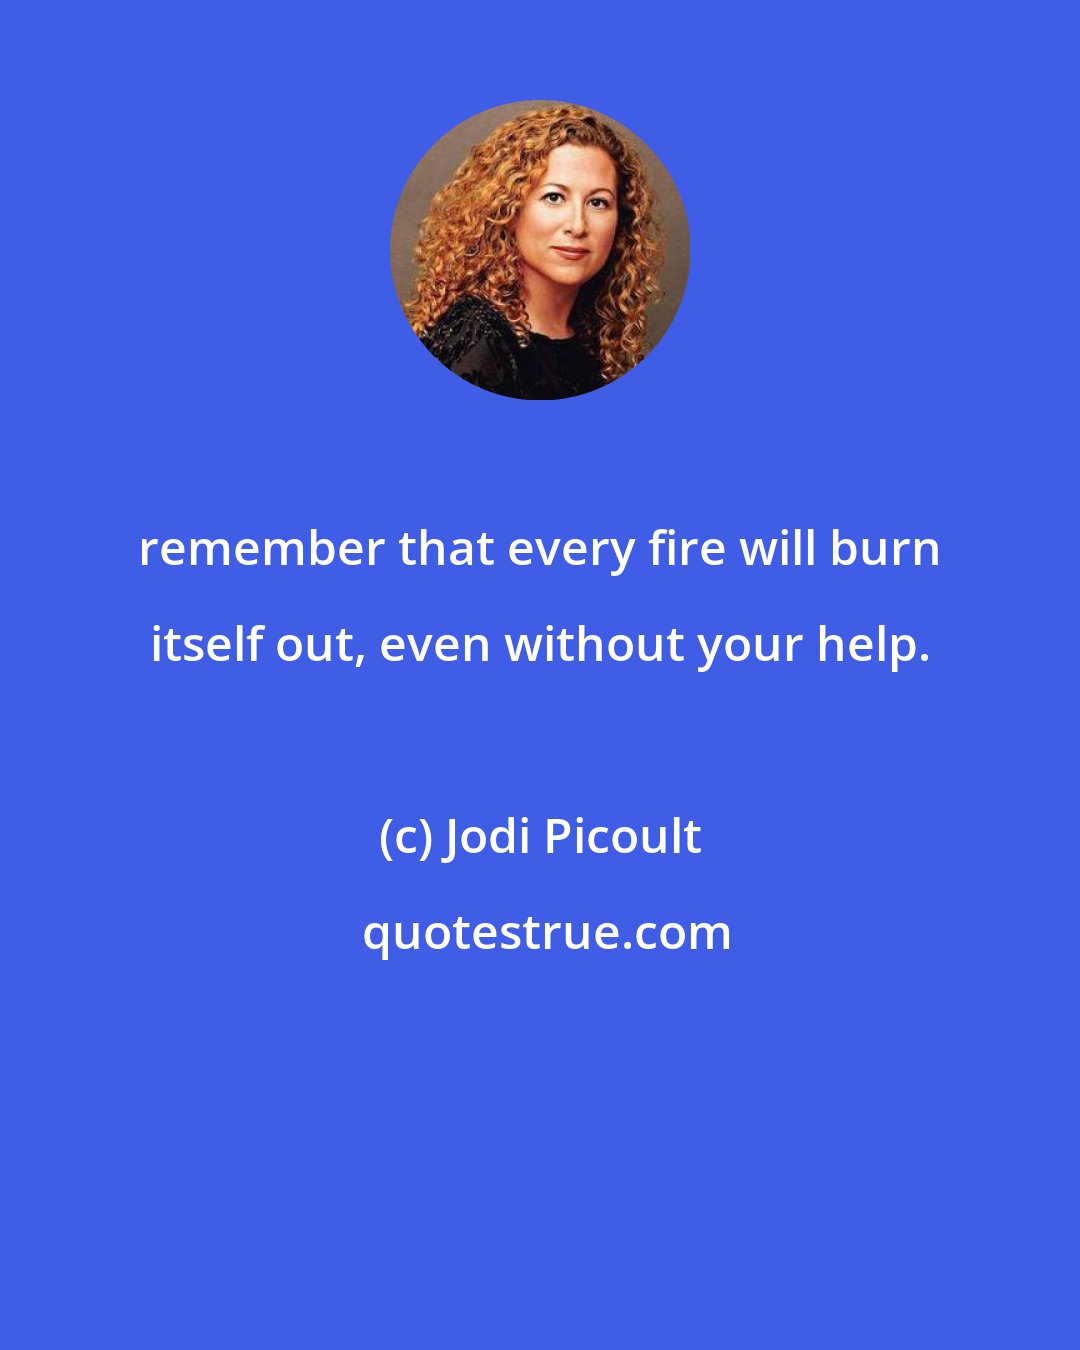 Jodi Picoult: remember that every fire will burn itself out, even without your help.